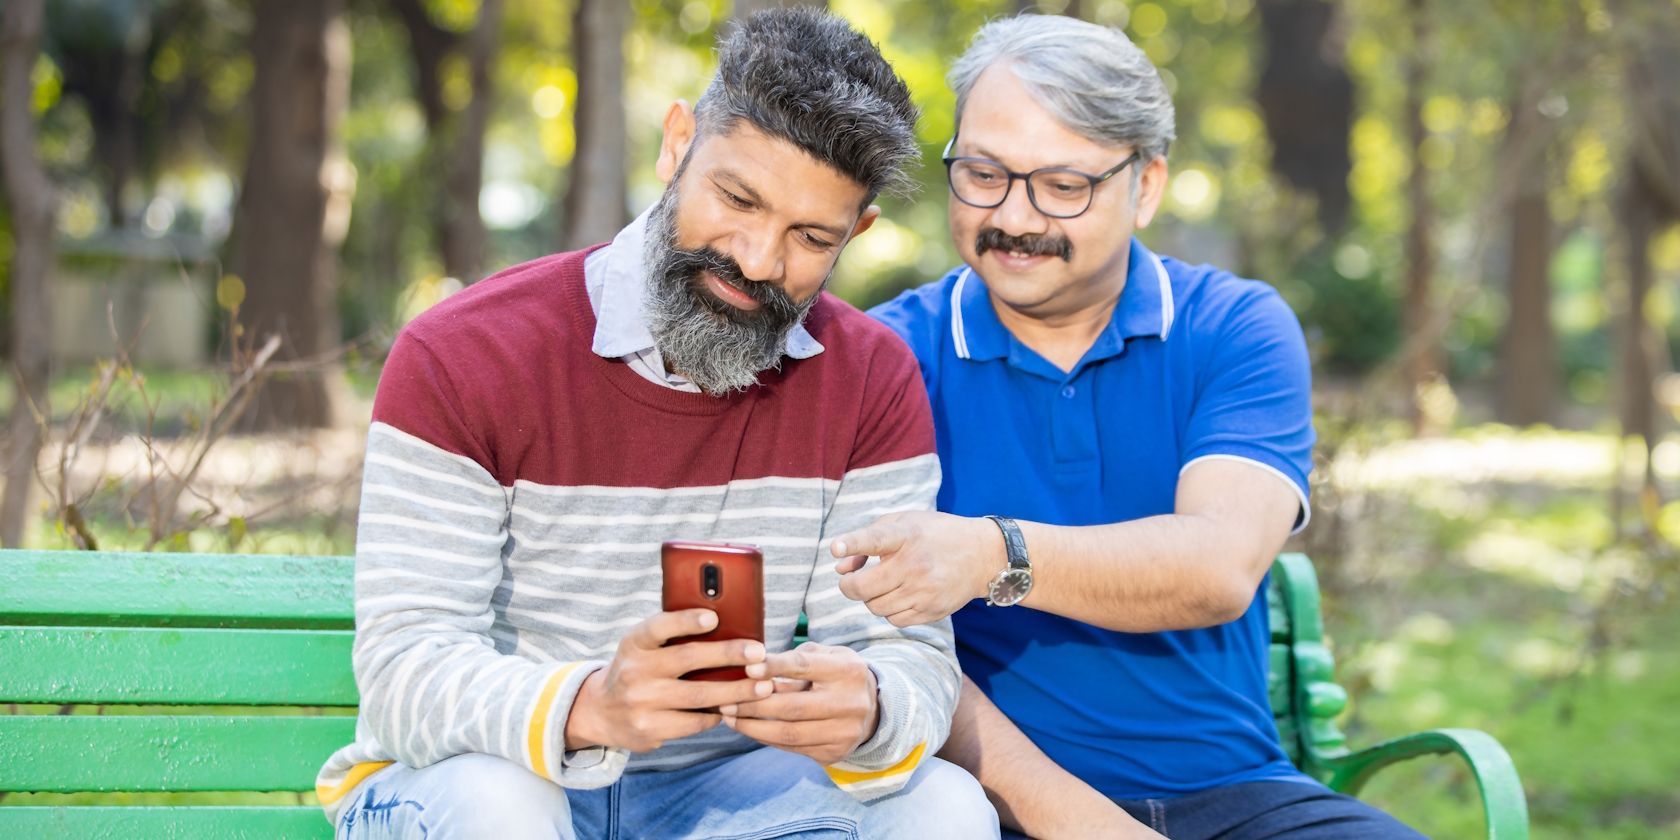 A middle-aged guy helping his dad use an Android phone